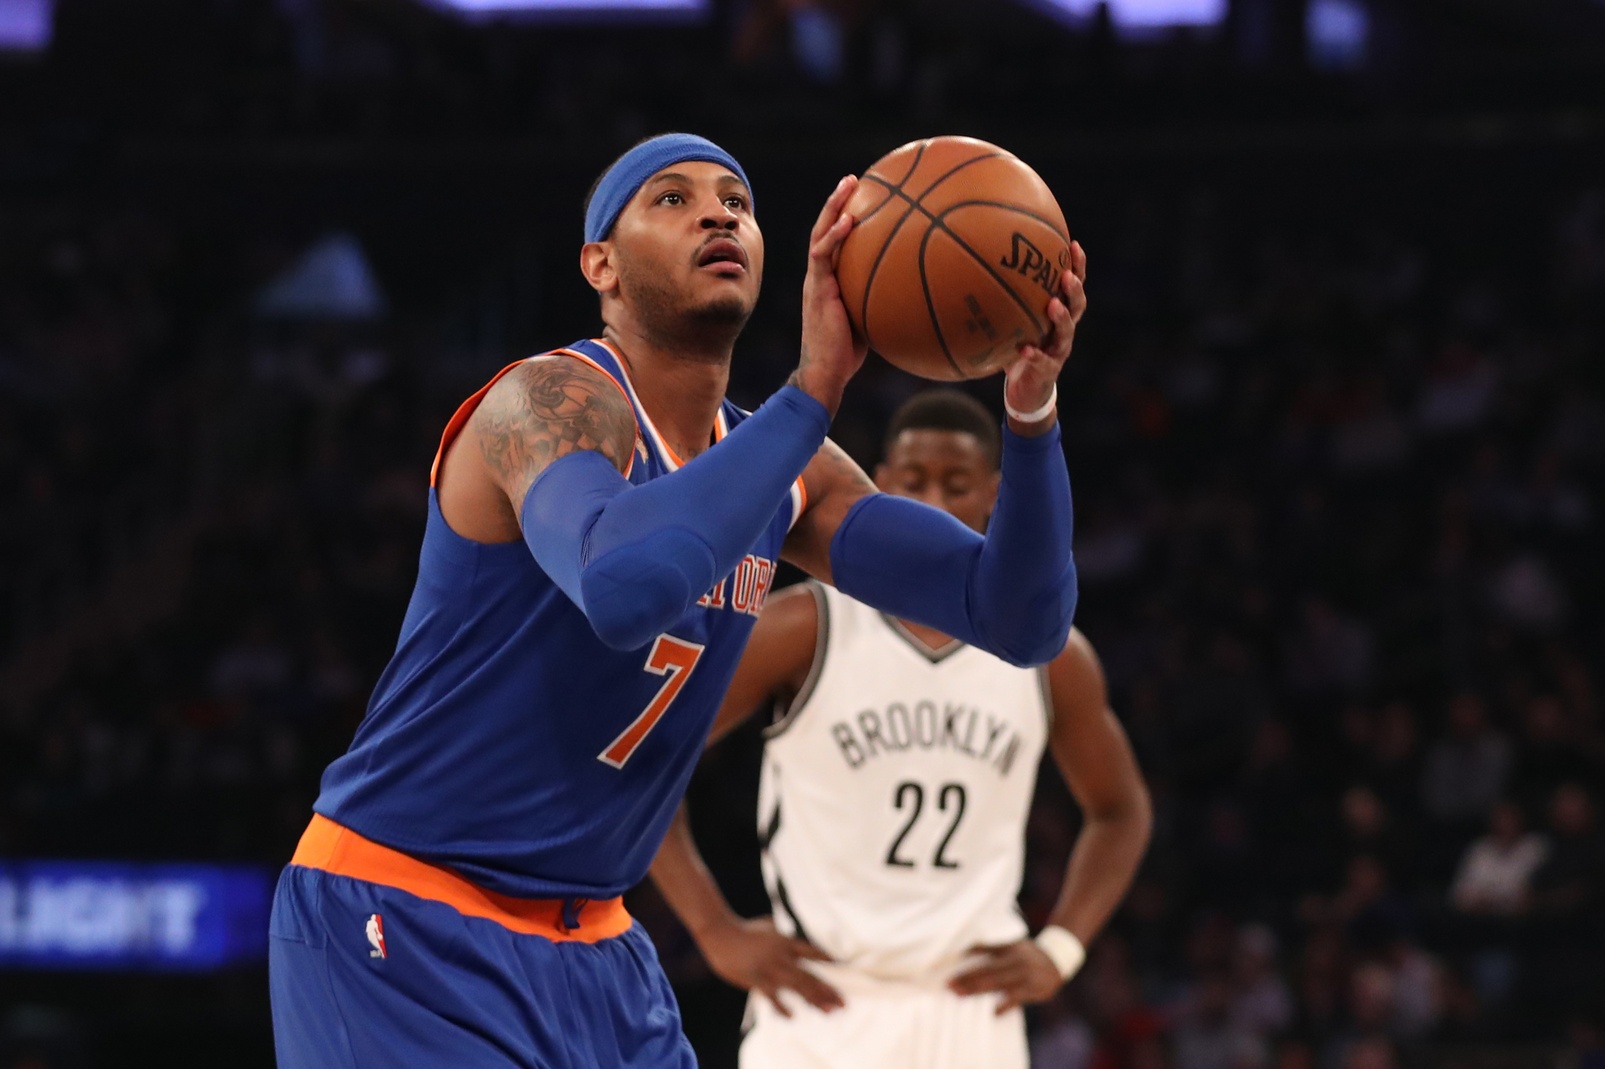 New York Knicks: Carmelo Anthony Cryptic About Future as Season Winds Down 